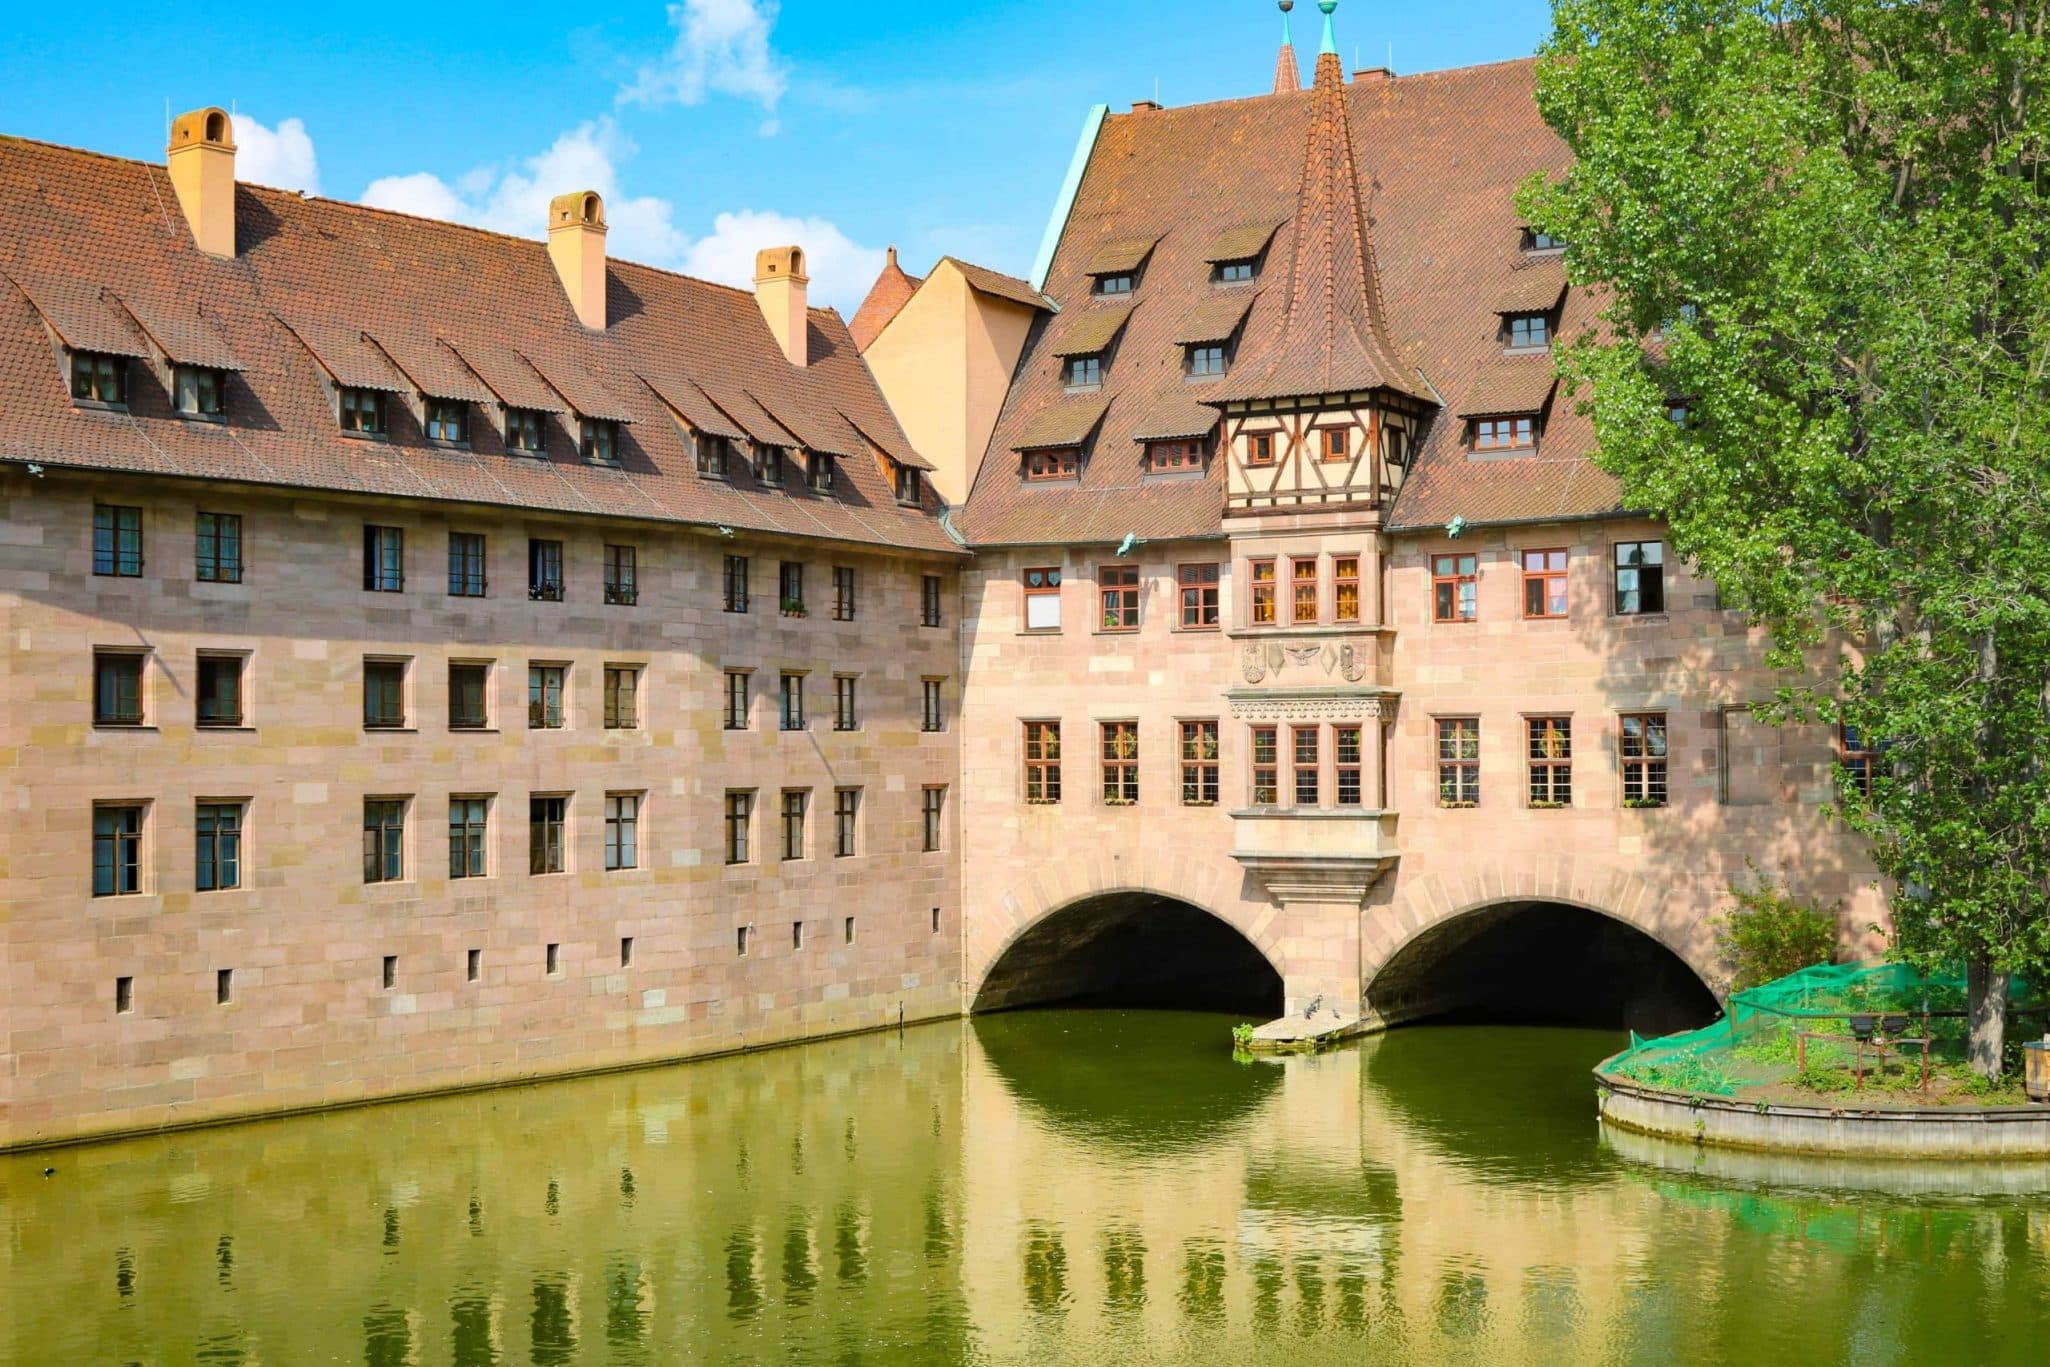 How to spend amazing 2 days in Nuremberg Old Town